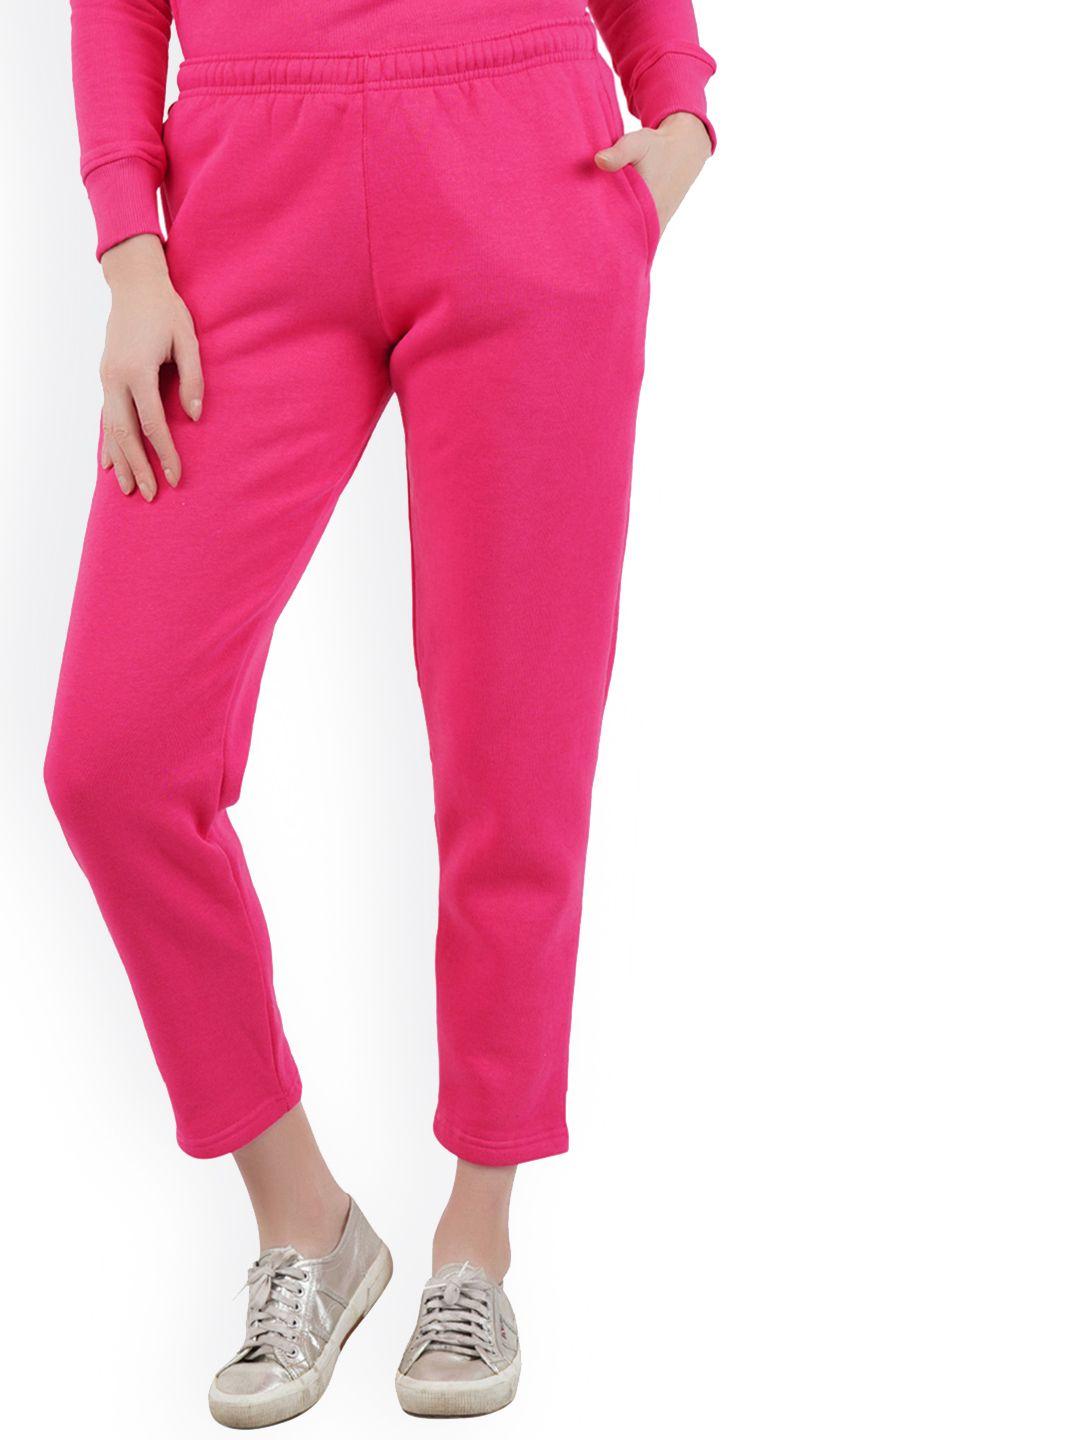 dyca women fuchsia pink solid cotton track pant